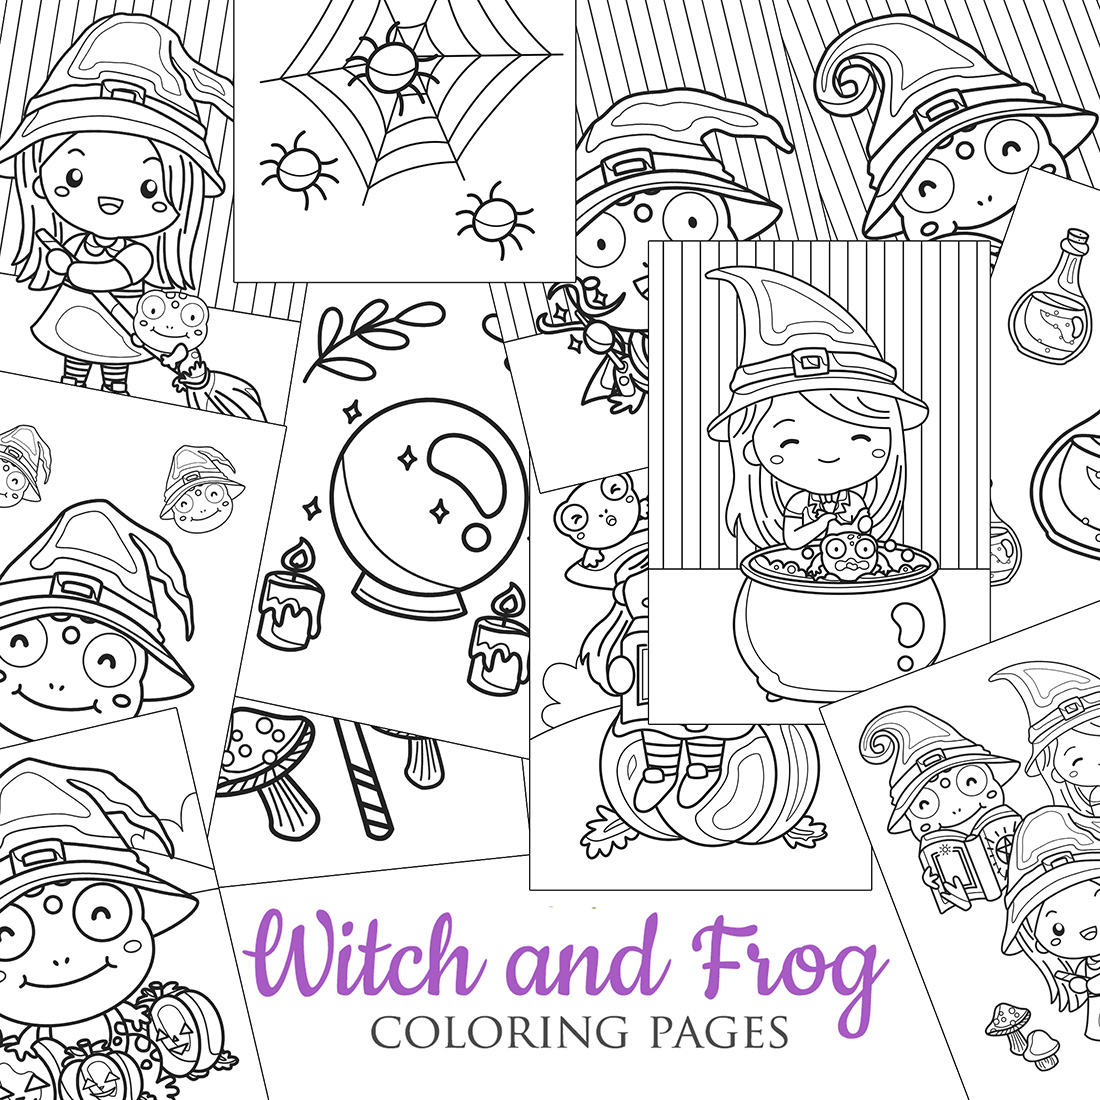 Cute Halloween Kids Witch Costume and Frog Animal Cartoon Coloring for Kids and Adult Activity cover image.